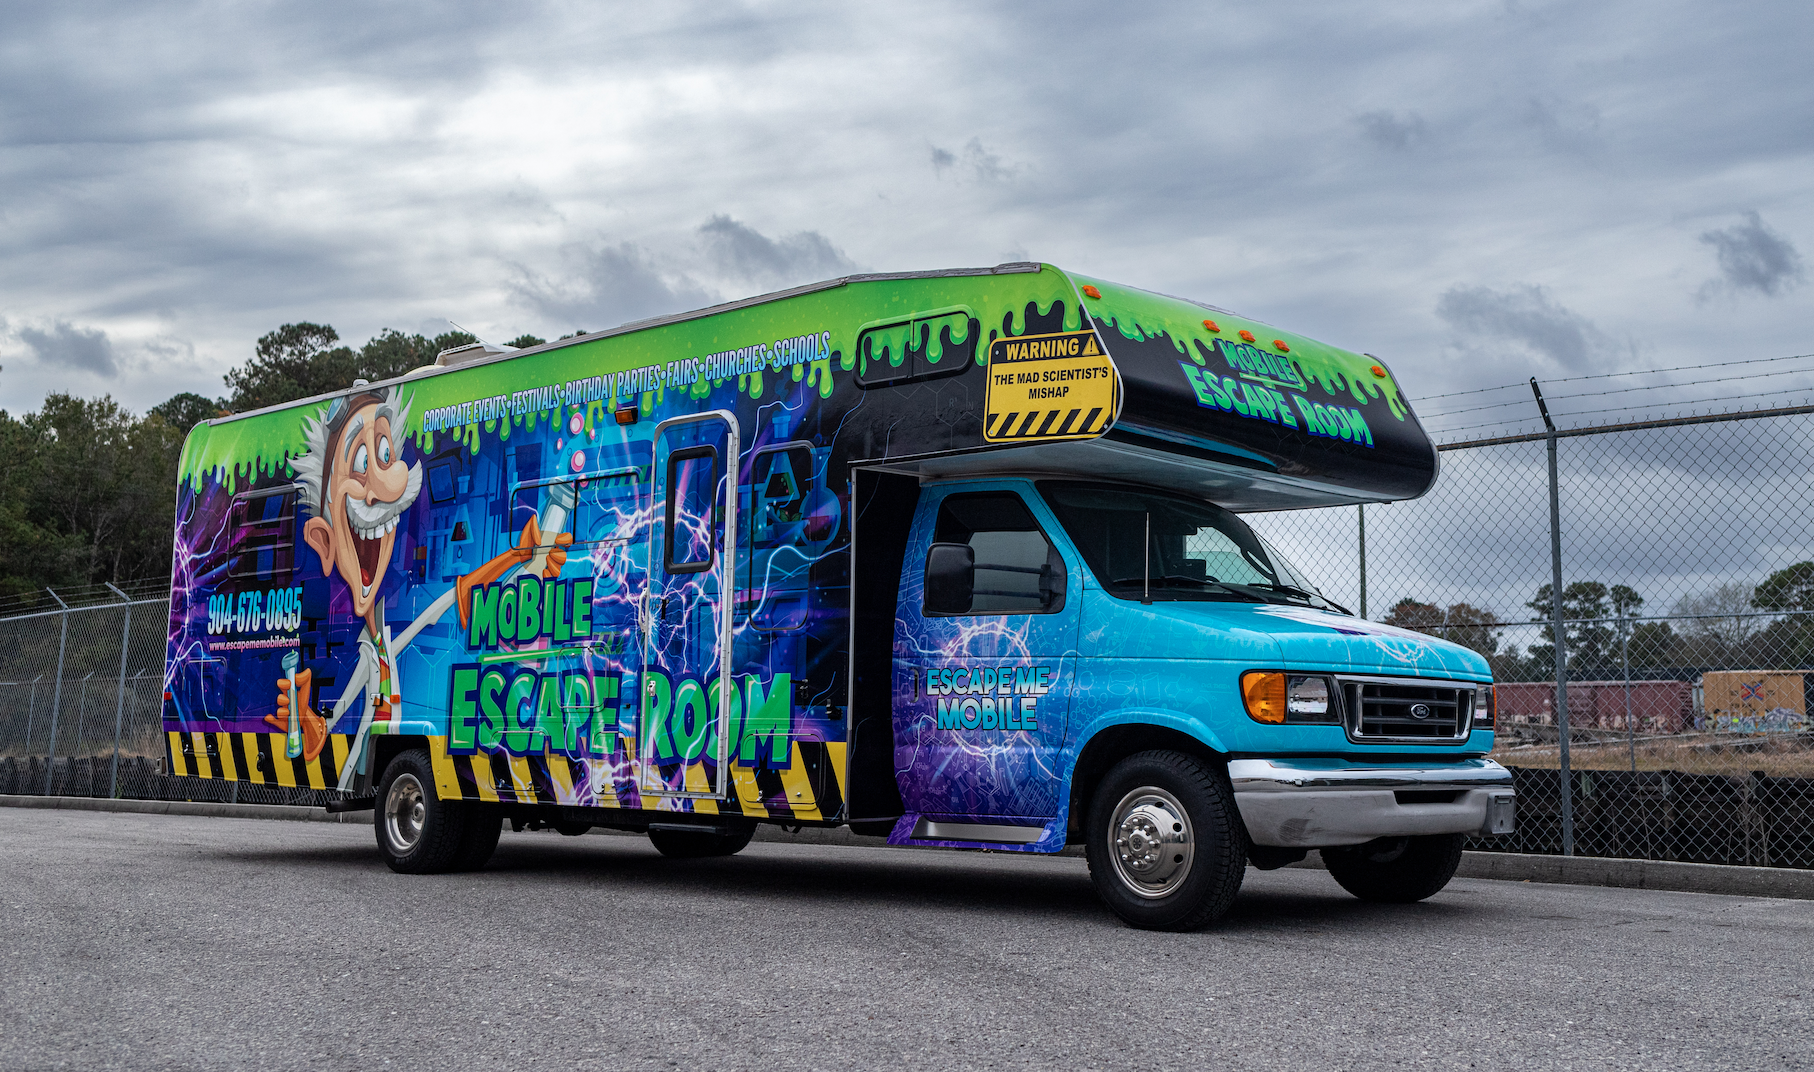 Ford van with mobile escape room graphics